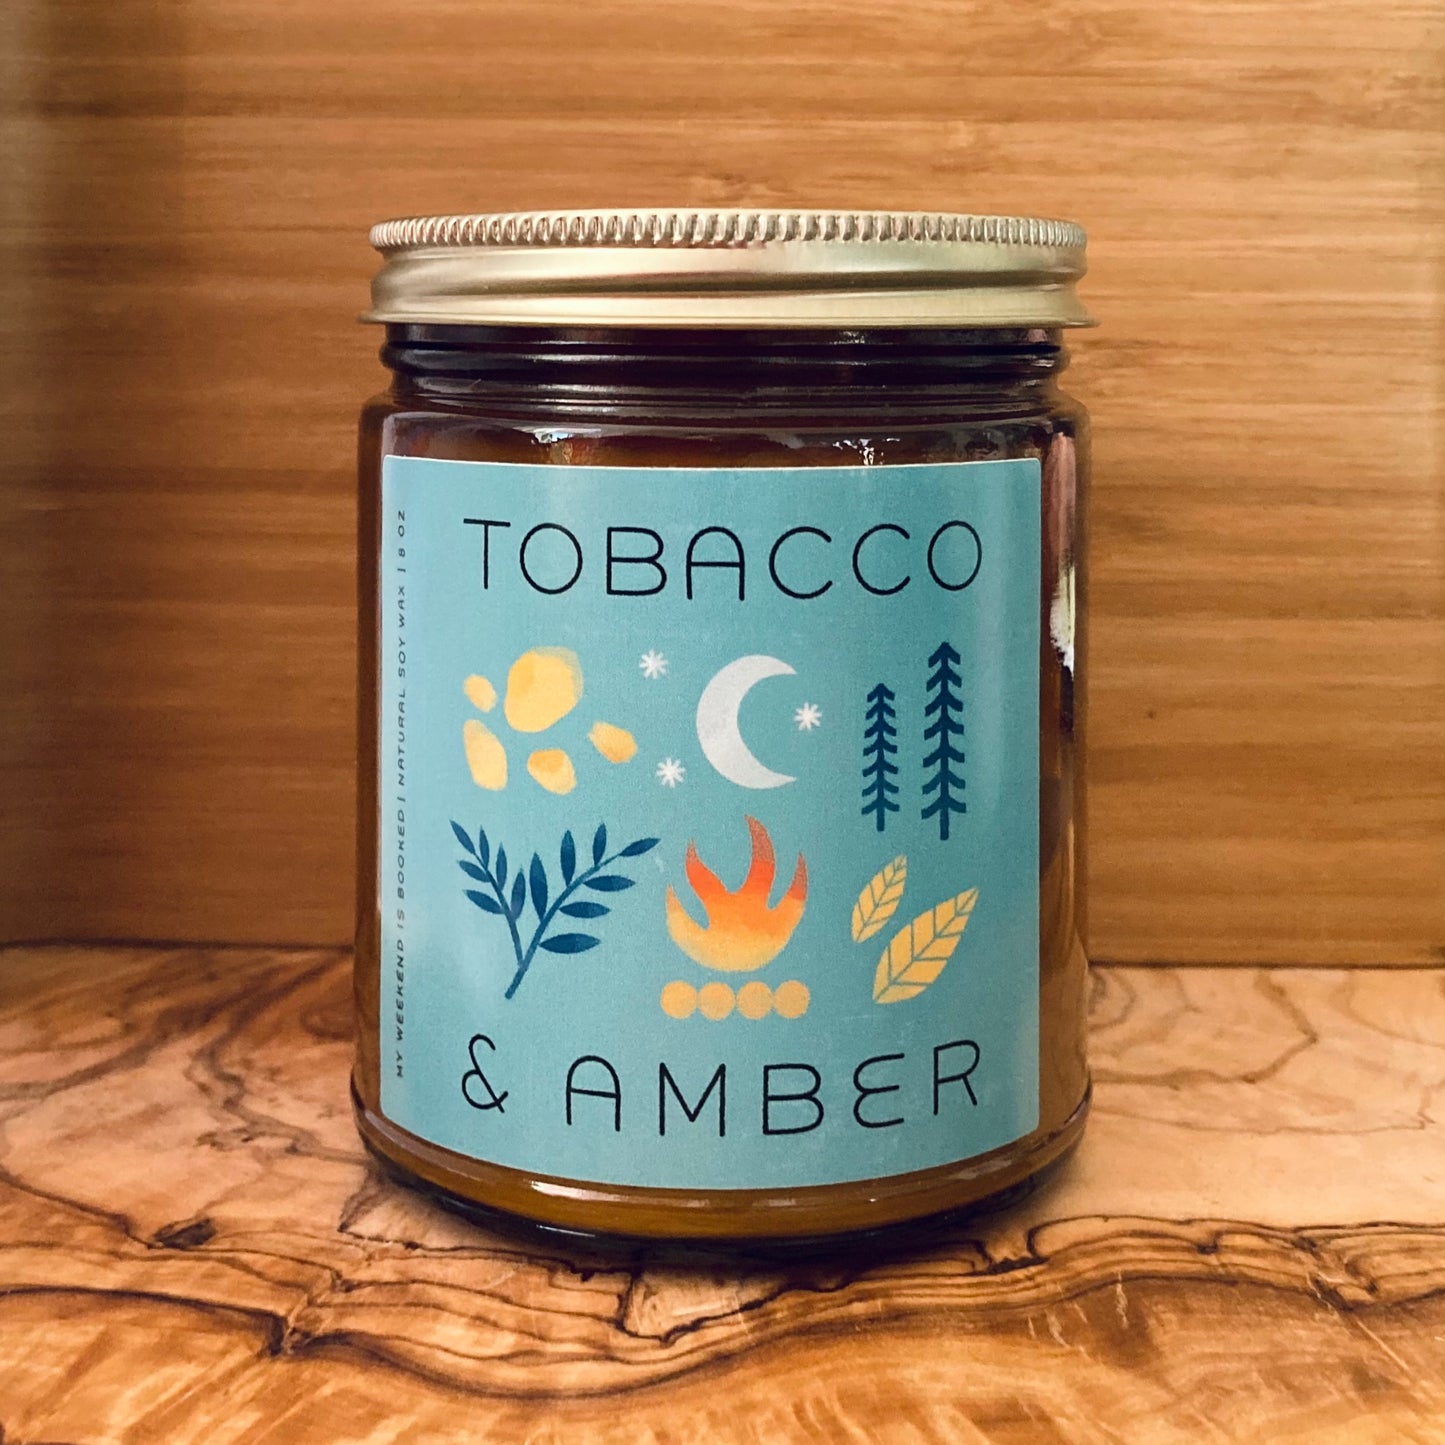 Tobacco and Amber Soy Candle - Amber Jar